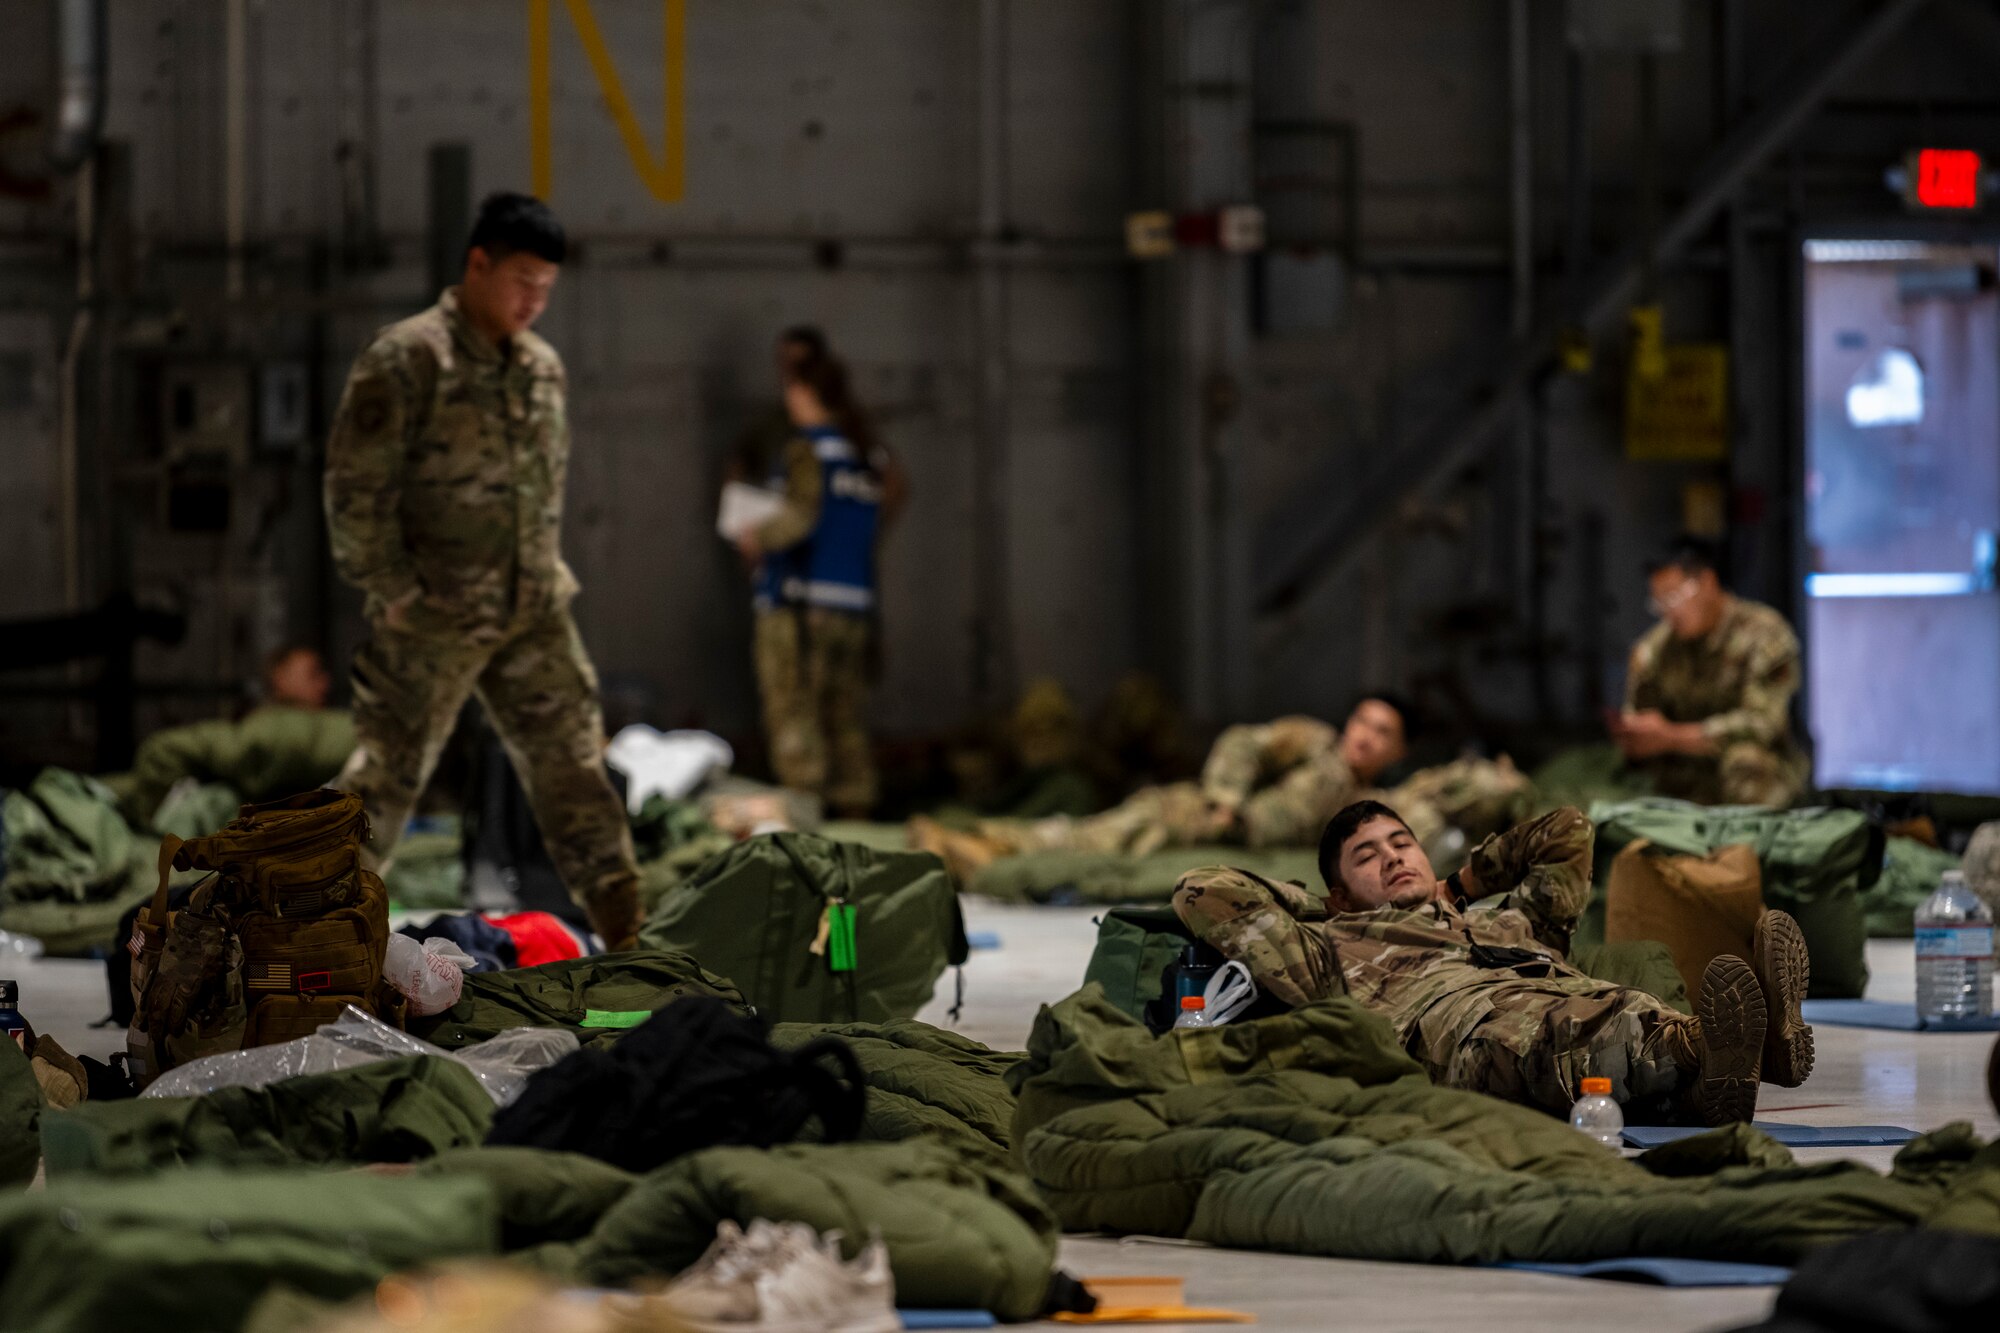 while many sleeping areas of sleeping bags and pads are on the ground in a massive room, a man lays on one and rests